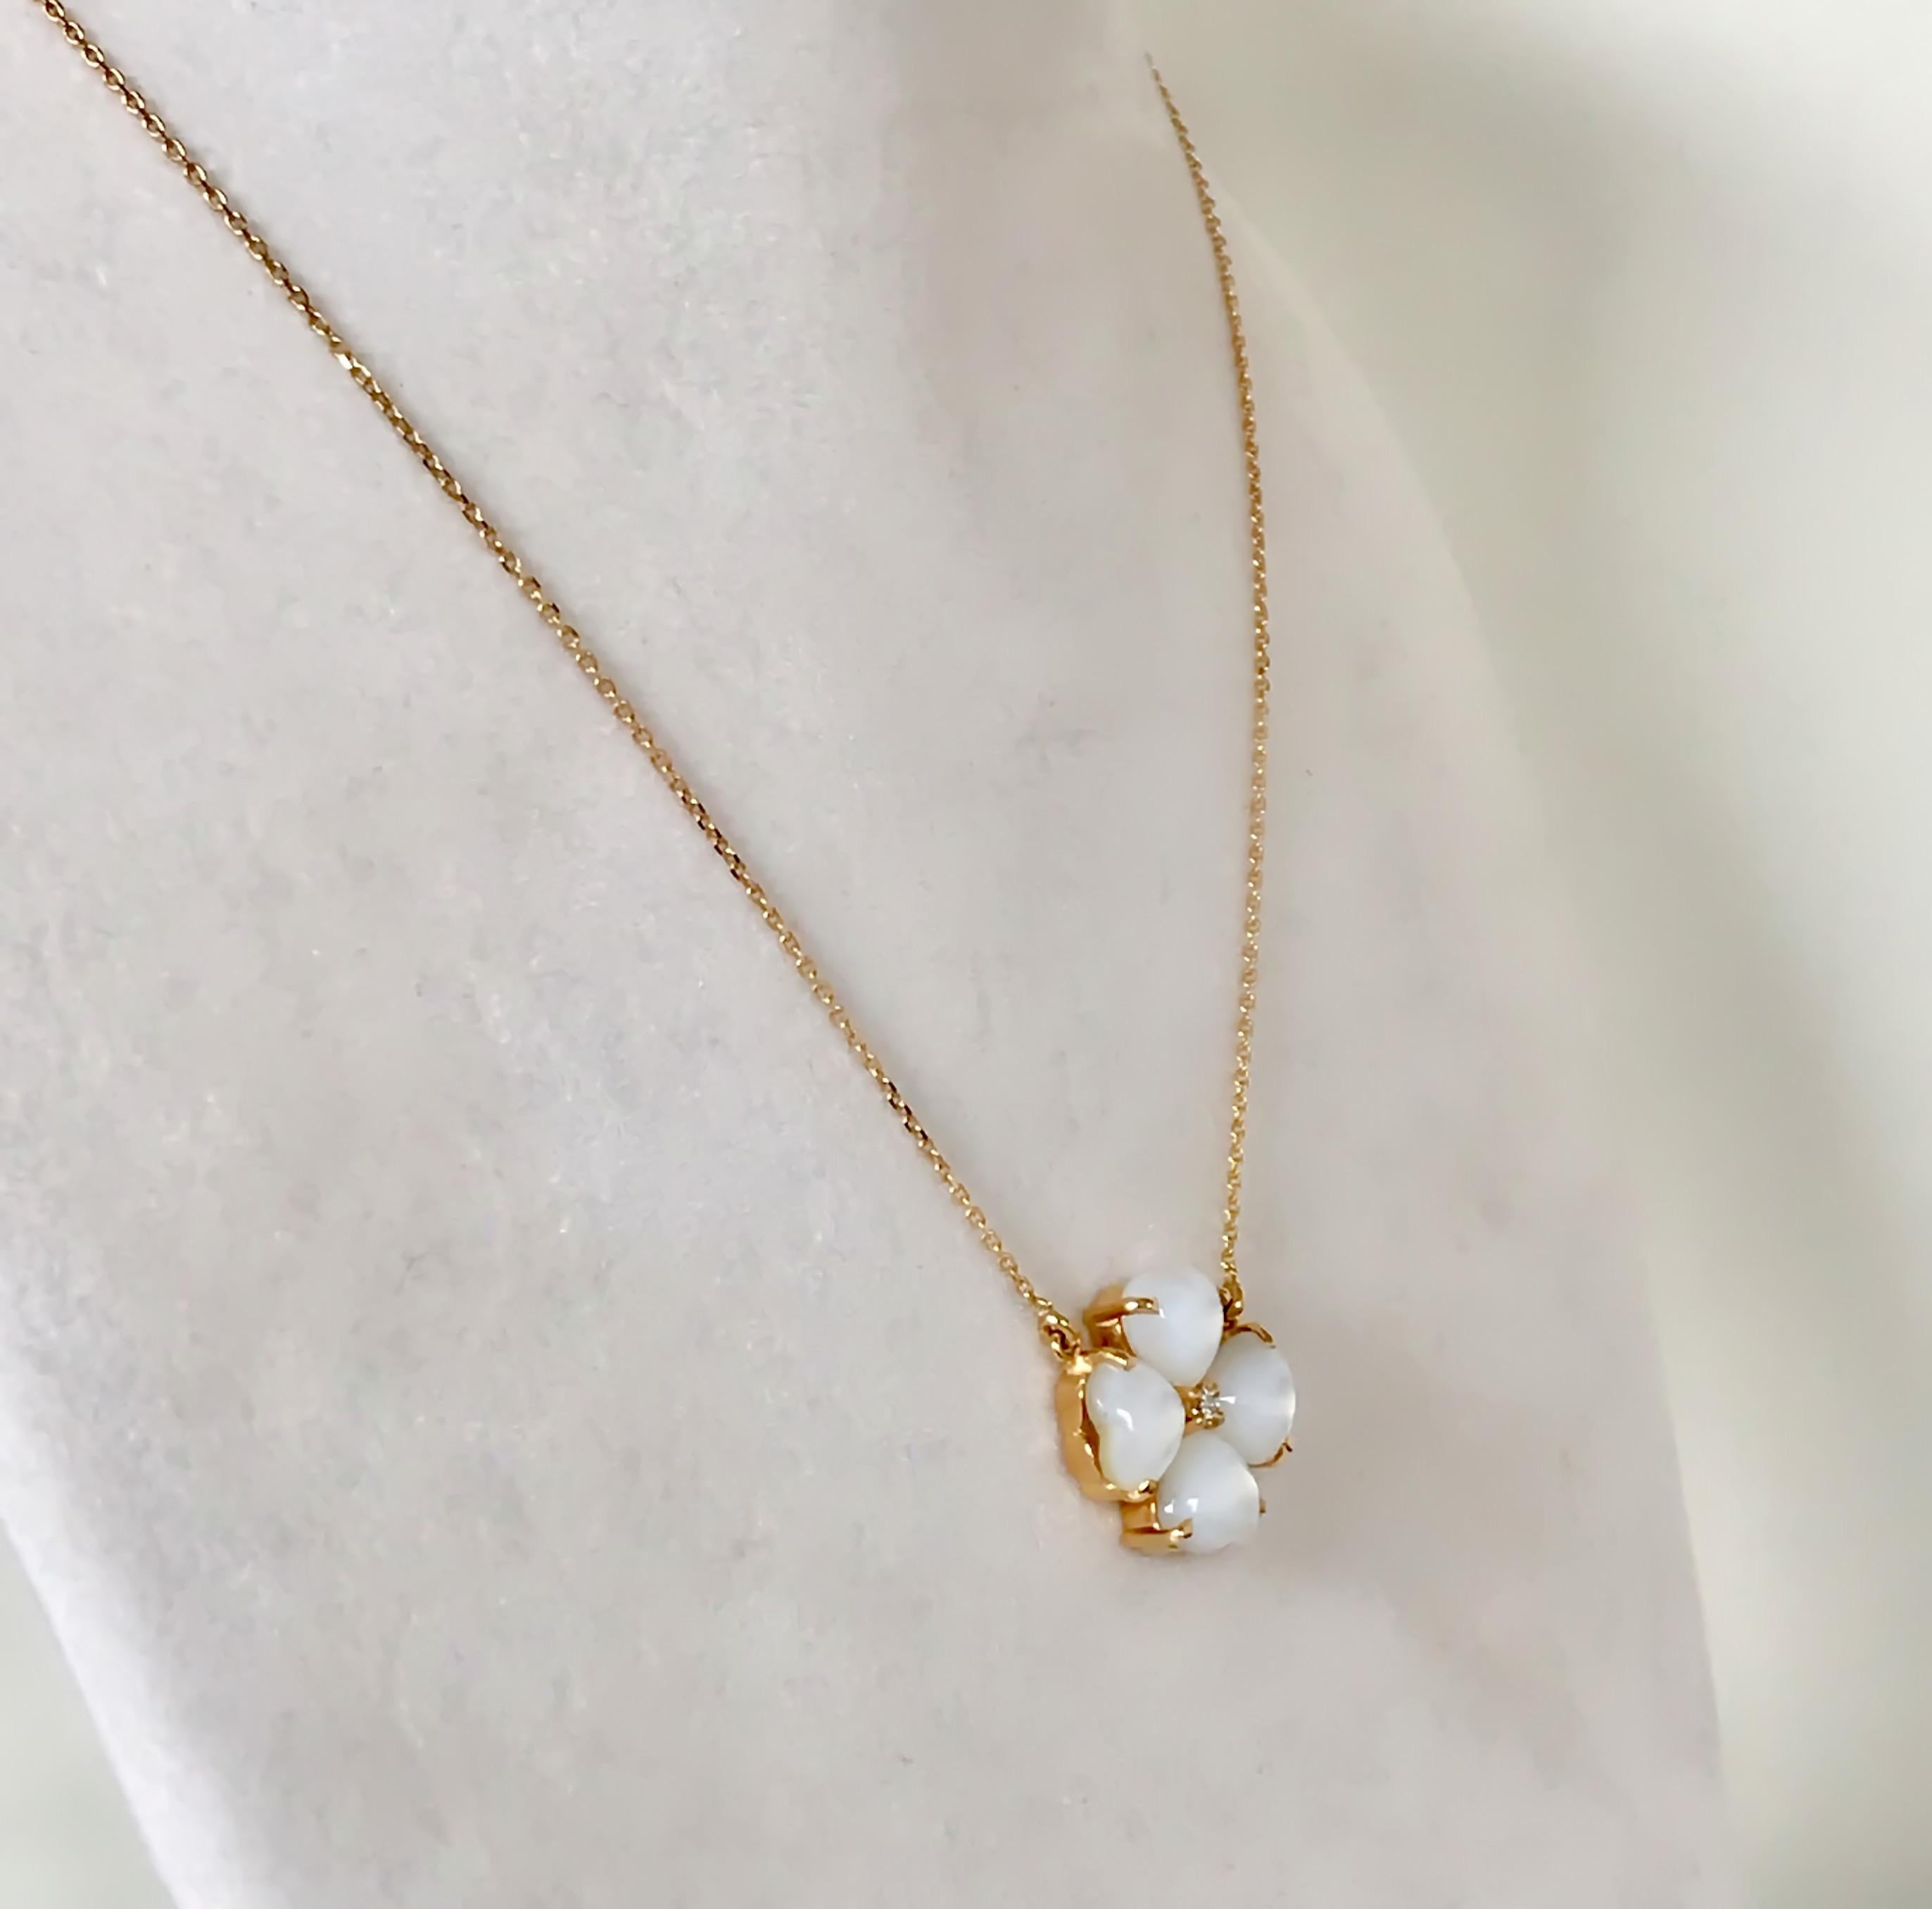 Handmade 18 karat solid gold necklace with mother of pearl and a diamond centre. 
Four leaves clover is a symbol of good luck and happiness.  Those who find a four-leaf clover are destined for good luck, as each leaf in the clover symbolises faith,